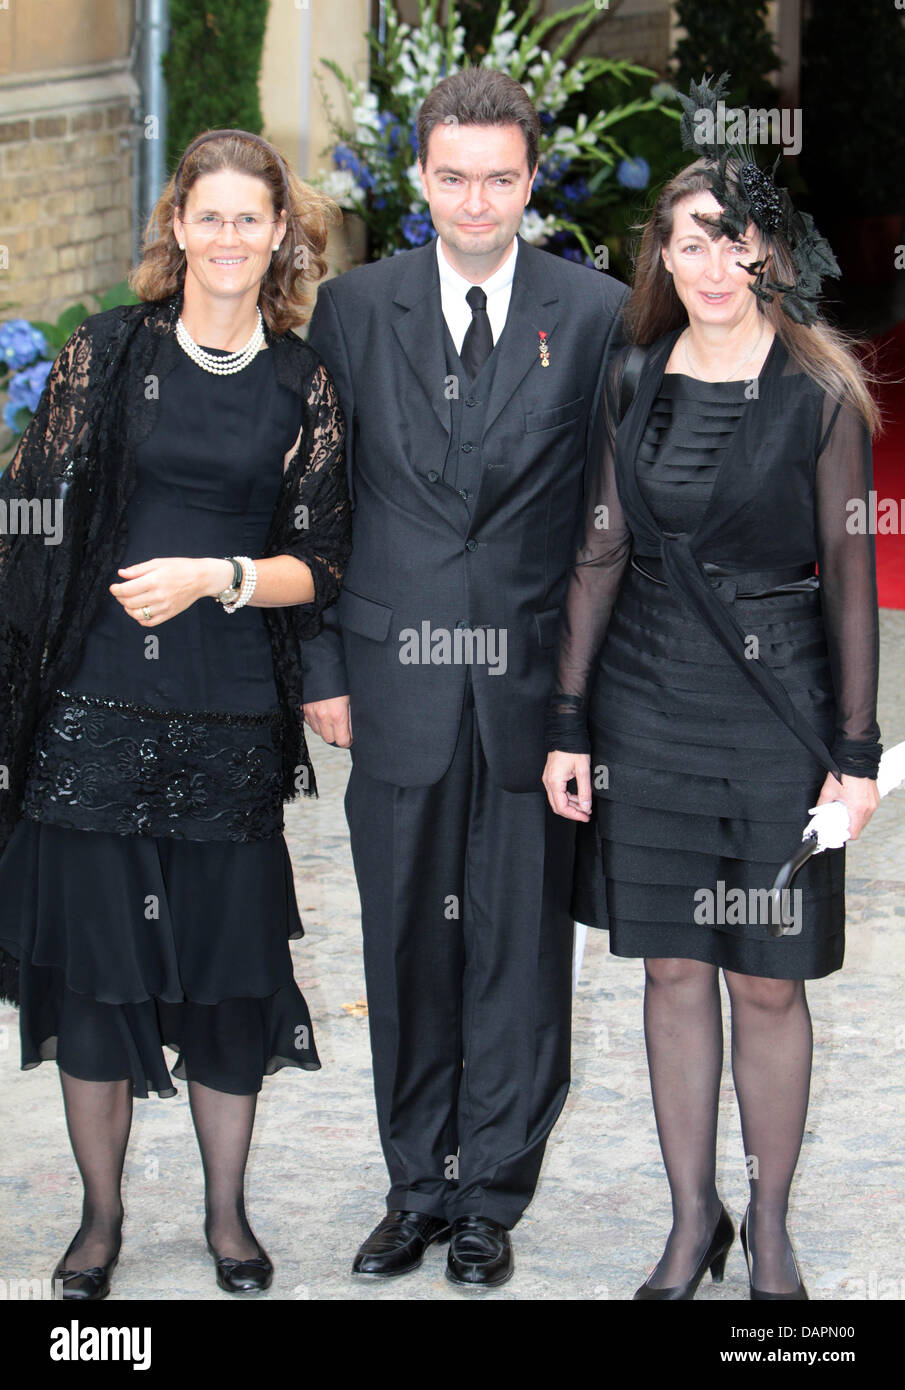 Duchess Eilika (L) and Georg von Habsburg arrive for the church wedding of Georg Friedrich, Prince of Prussia and Sophie, Princess of Isenburg, at the Church of Peace in Potsdam, Germany, 27 August 2011. Around 700 guests from German and international nobility have been invited to the Hohenzollern wedding in the magnificent setting of Sanssouci. Photo:  Albert Nieboer NETHERLANDS O Stock Photo